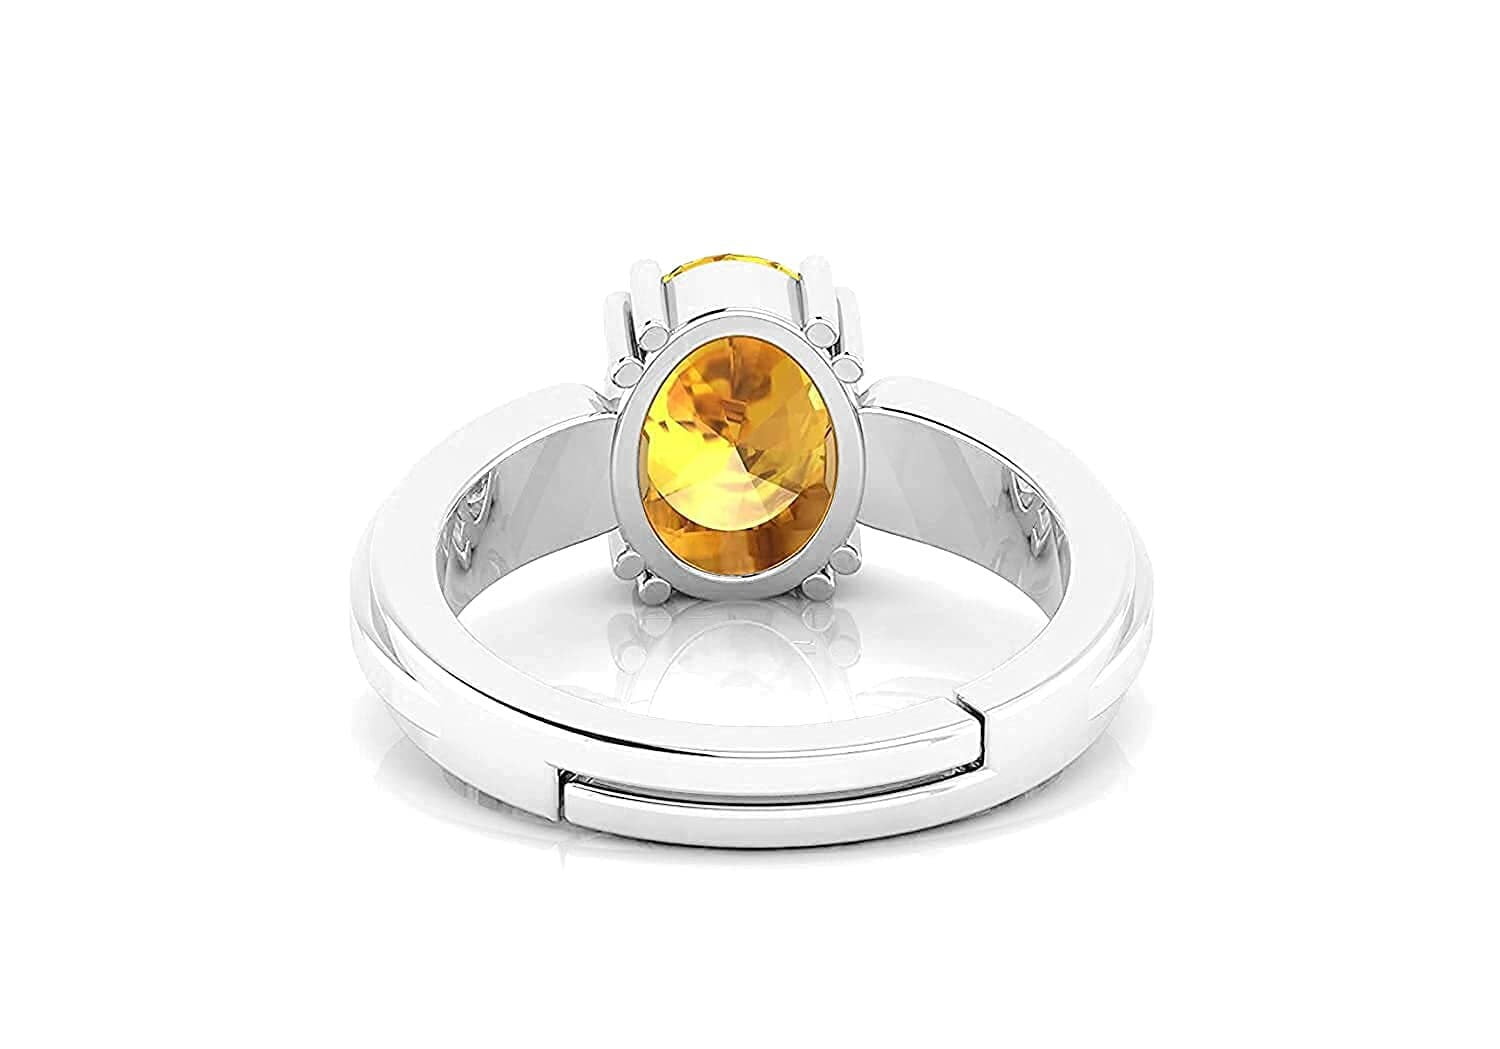 Buy CEYLONMINE Natural Yellow Sapphire silver Ring 100 original certified  stone 6.25 ratti Pukhraj ring Online - Get 73% Off